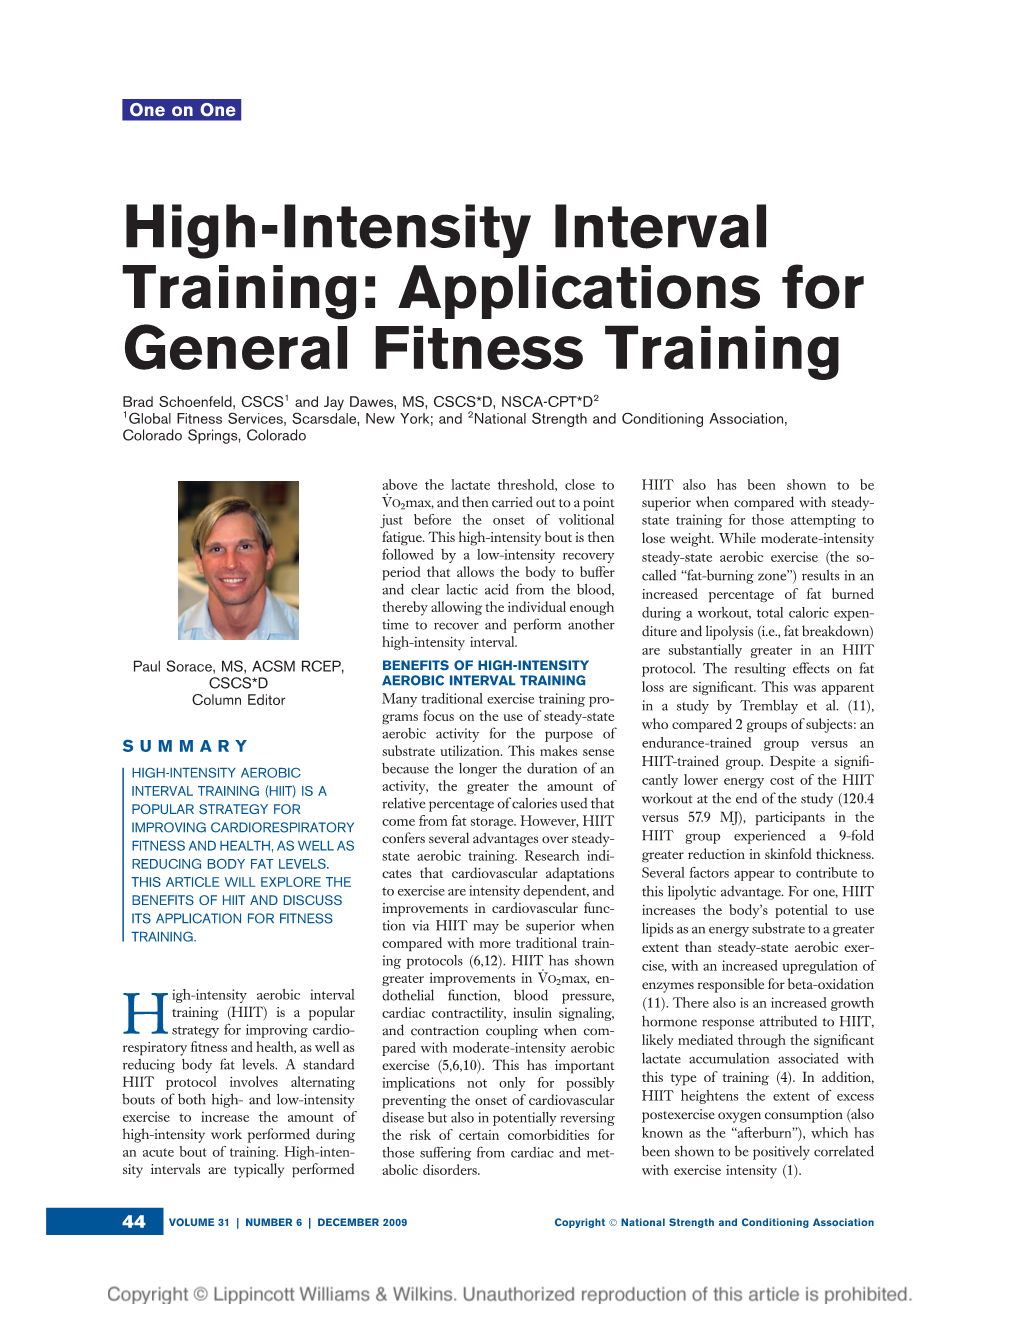 High-Intensity Interval Training: Applications for General Fitness Training